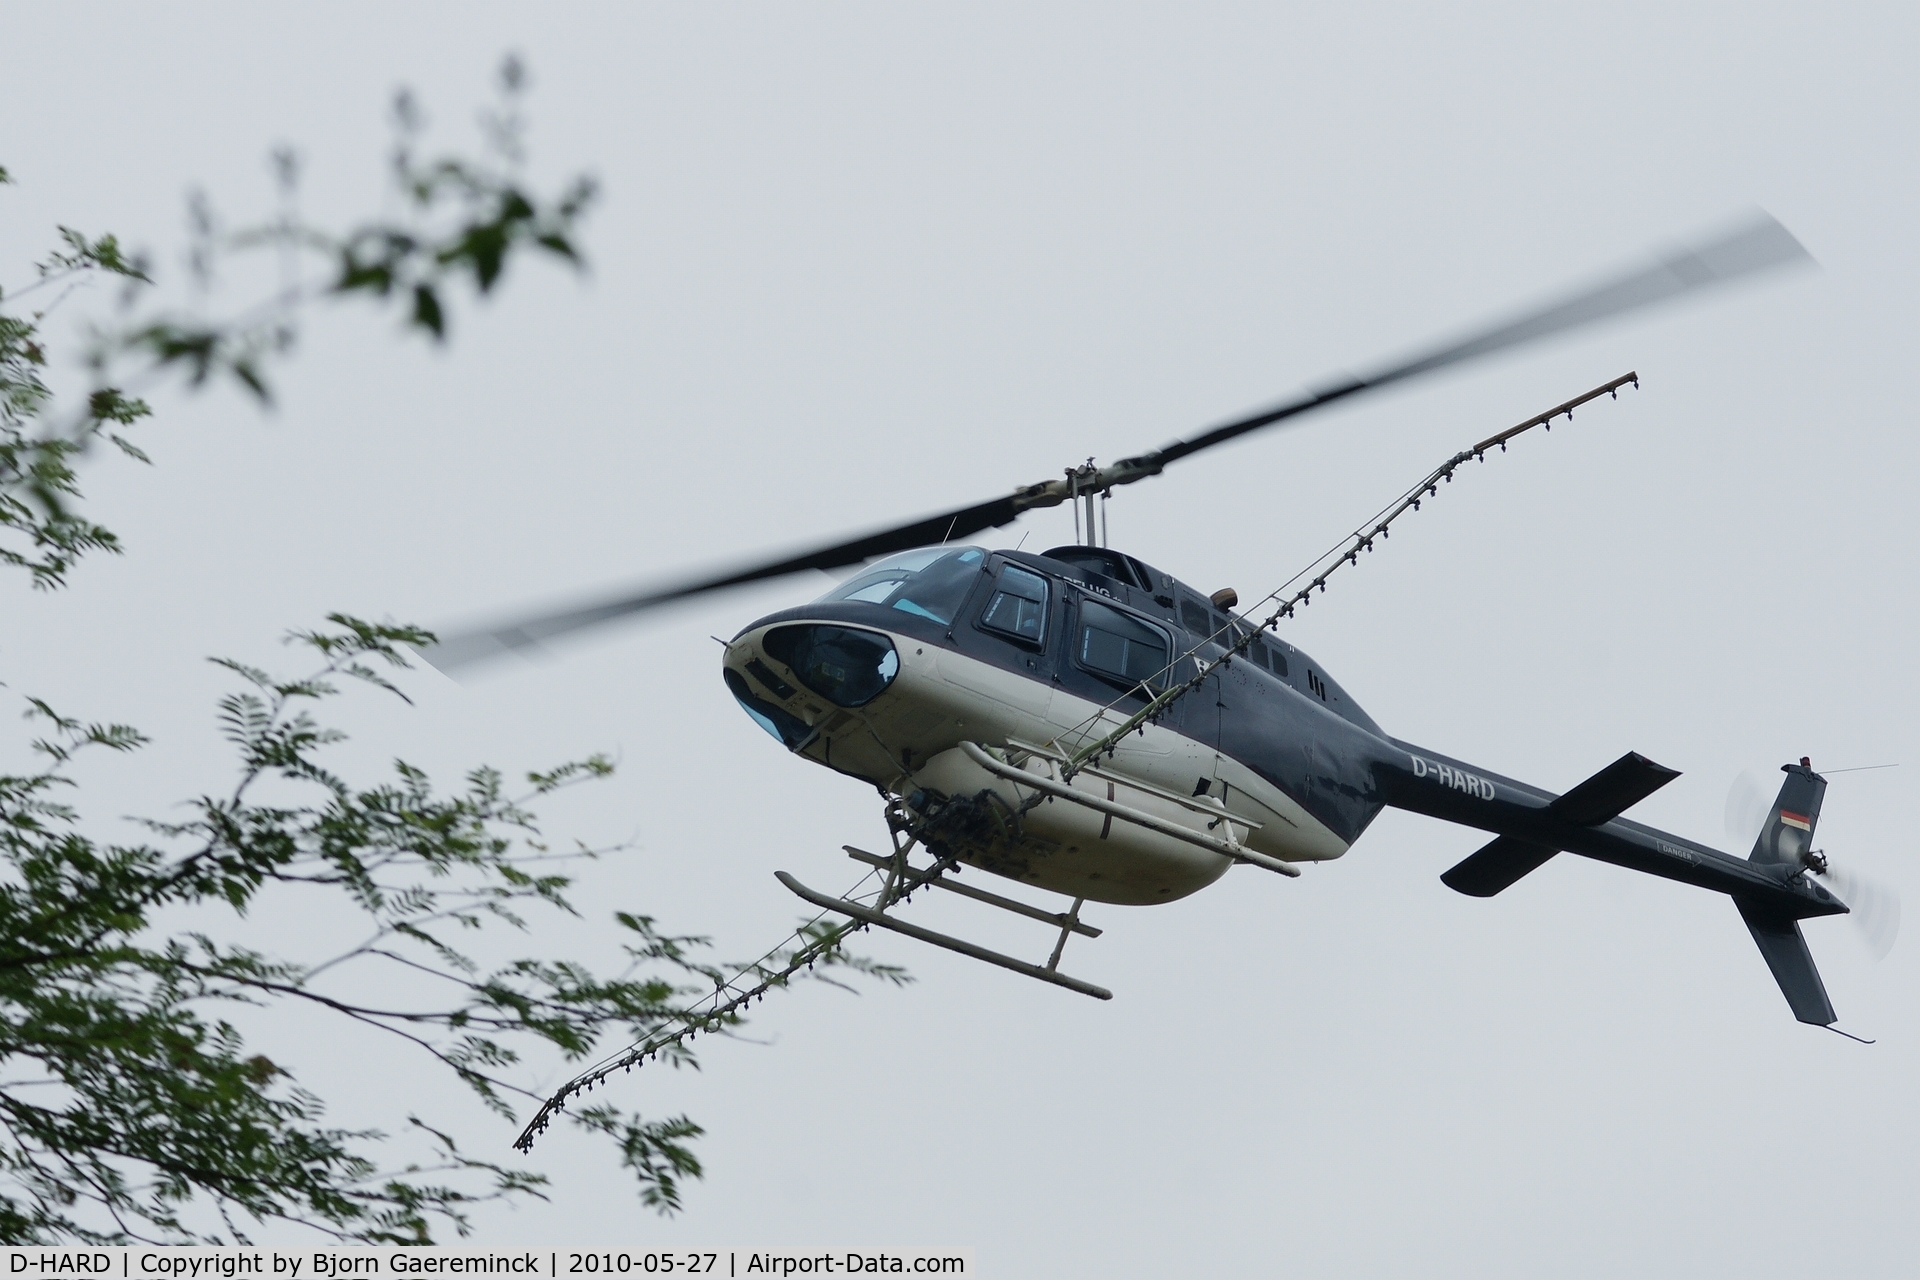 D-HARD, Bell 206B JetRanger II C/N 486, The helicopter flew over the vineyards at Koblenz-Güls, Germany.

Sony A700, Minolta 70-210 F4 at 105mm, F9, 1/320 sec, ISO 200.